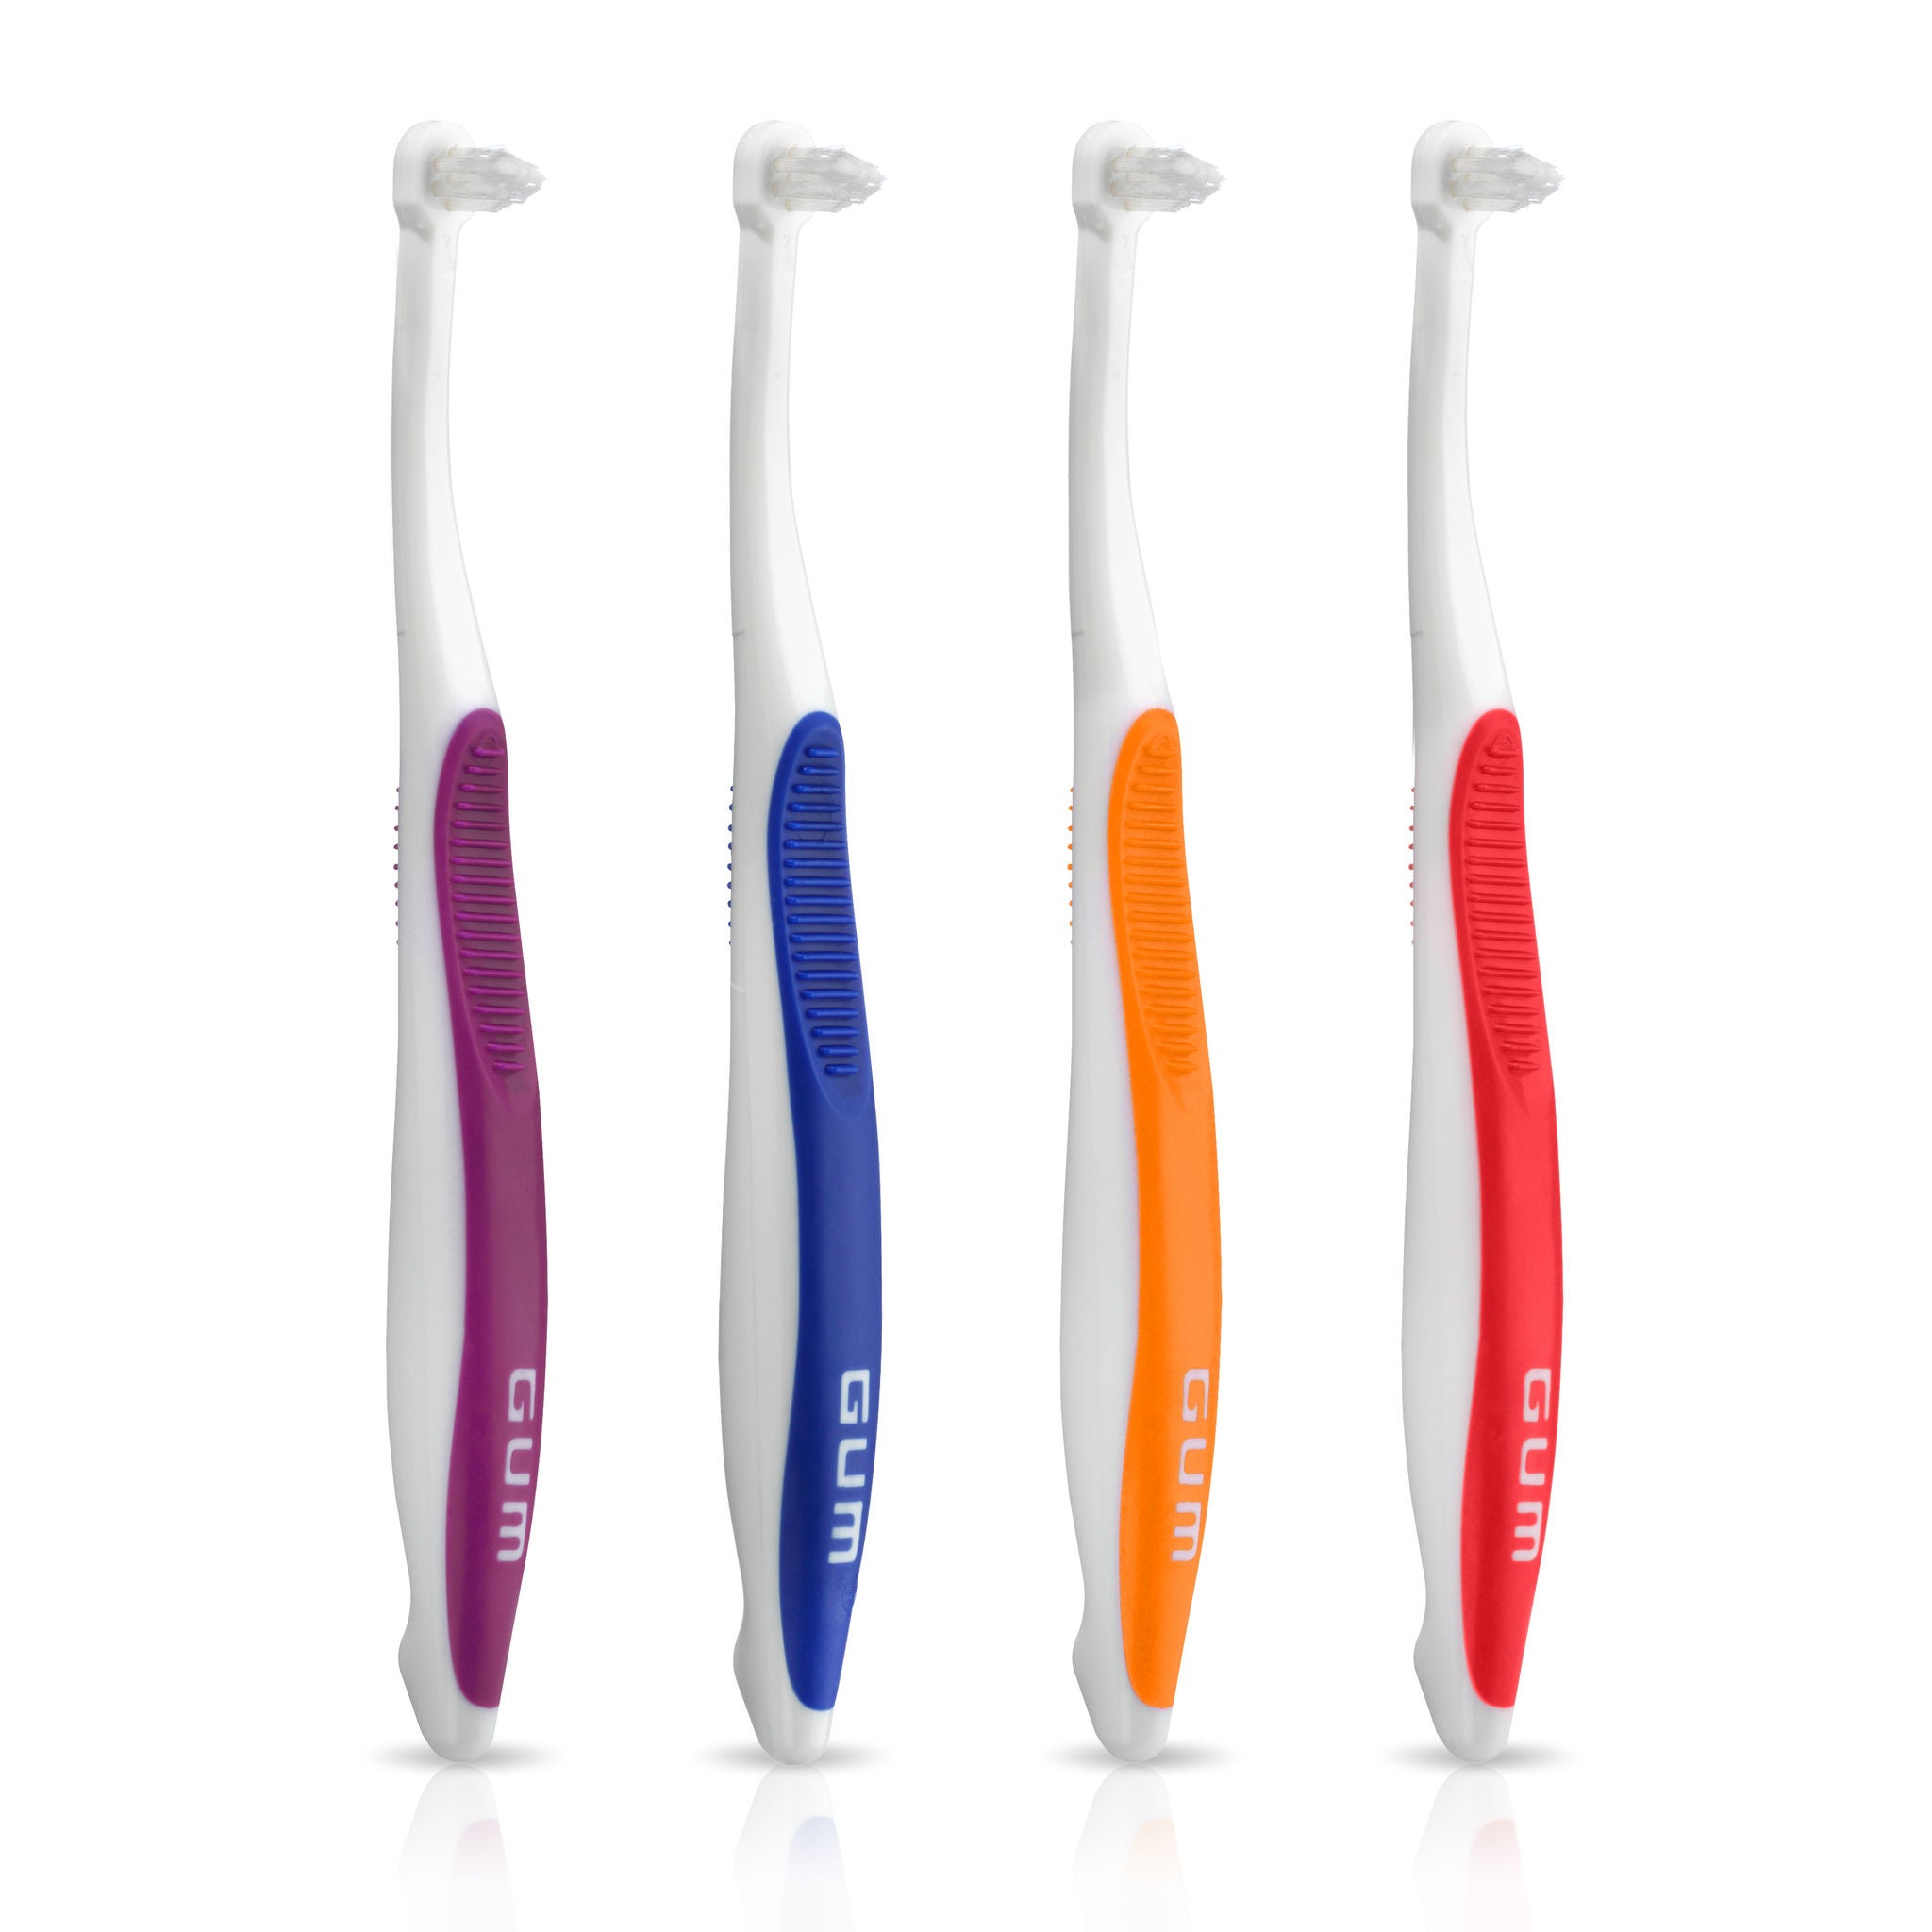 308-Product-Toothbrush-Manual-EndTuft-naked-4colors.jpg